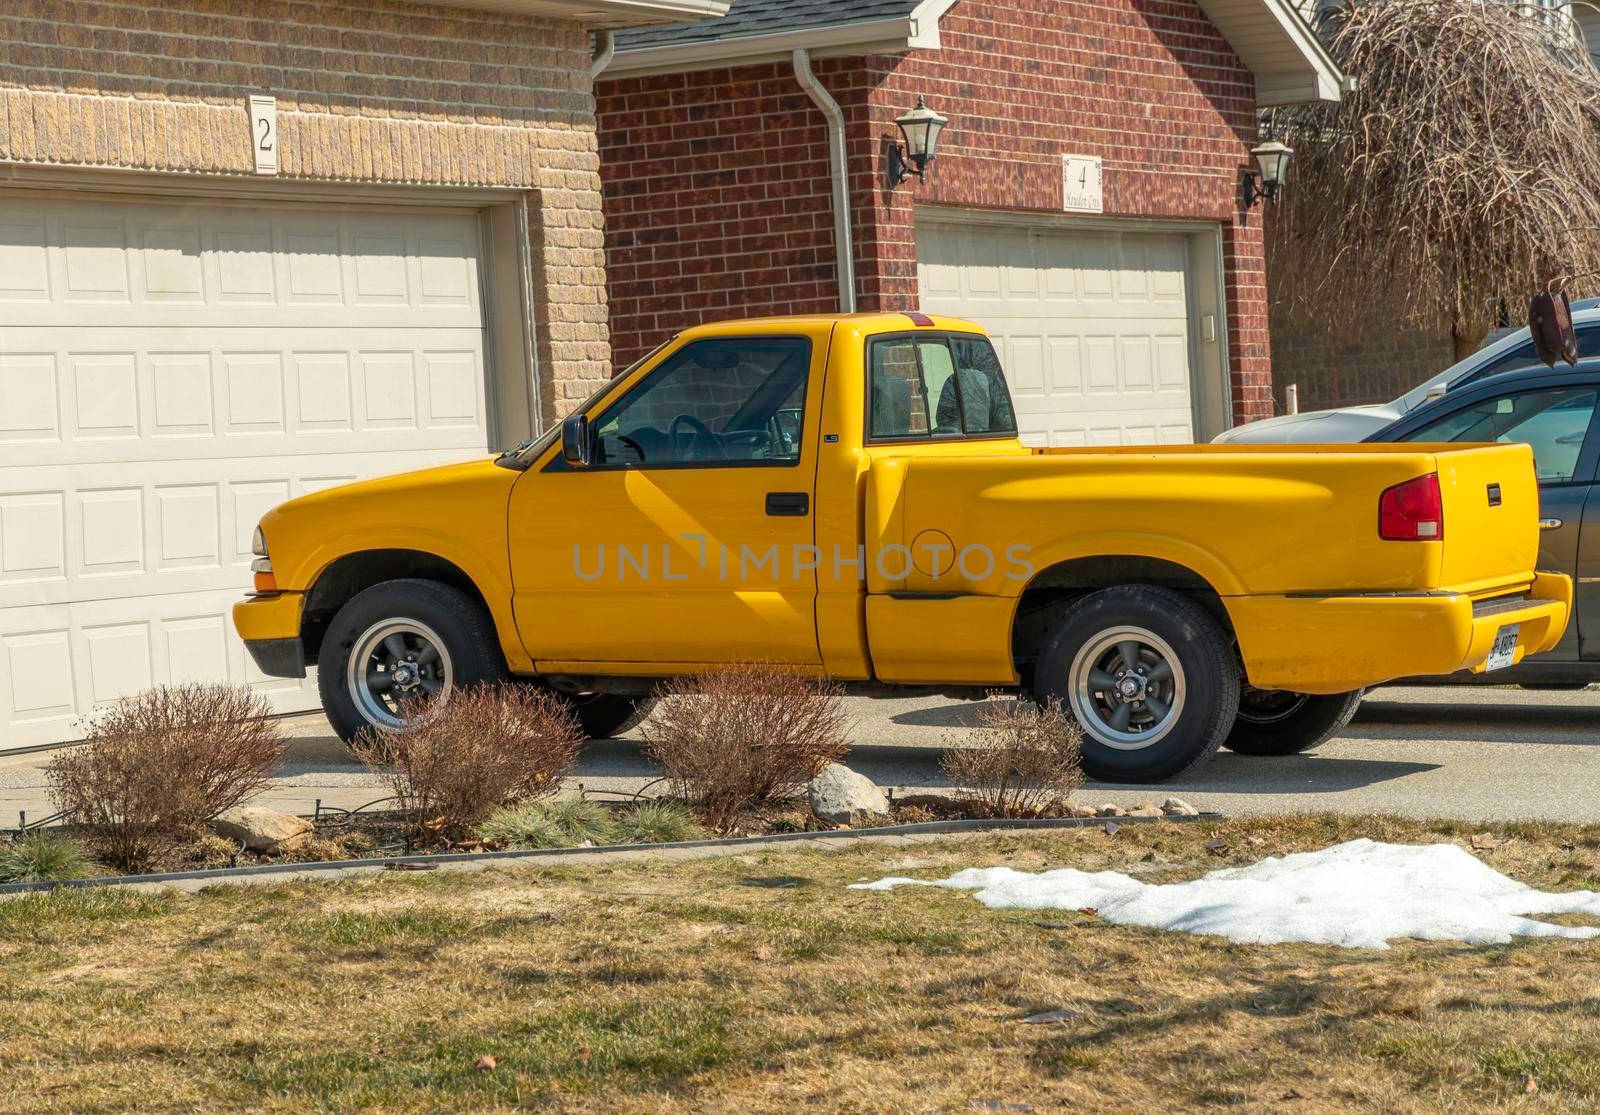 A beautiful yellow pickup truck stands near the garage on a warm day in early spring.
